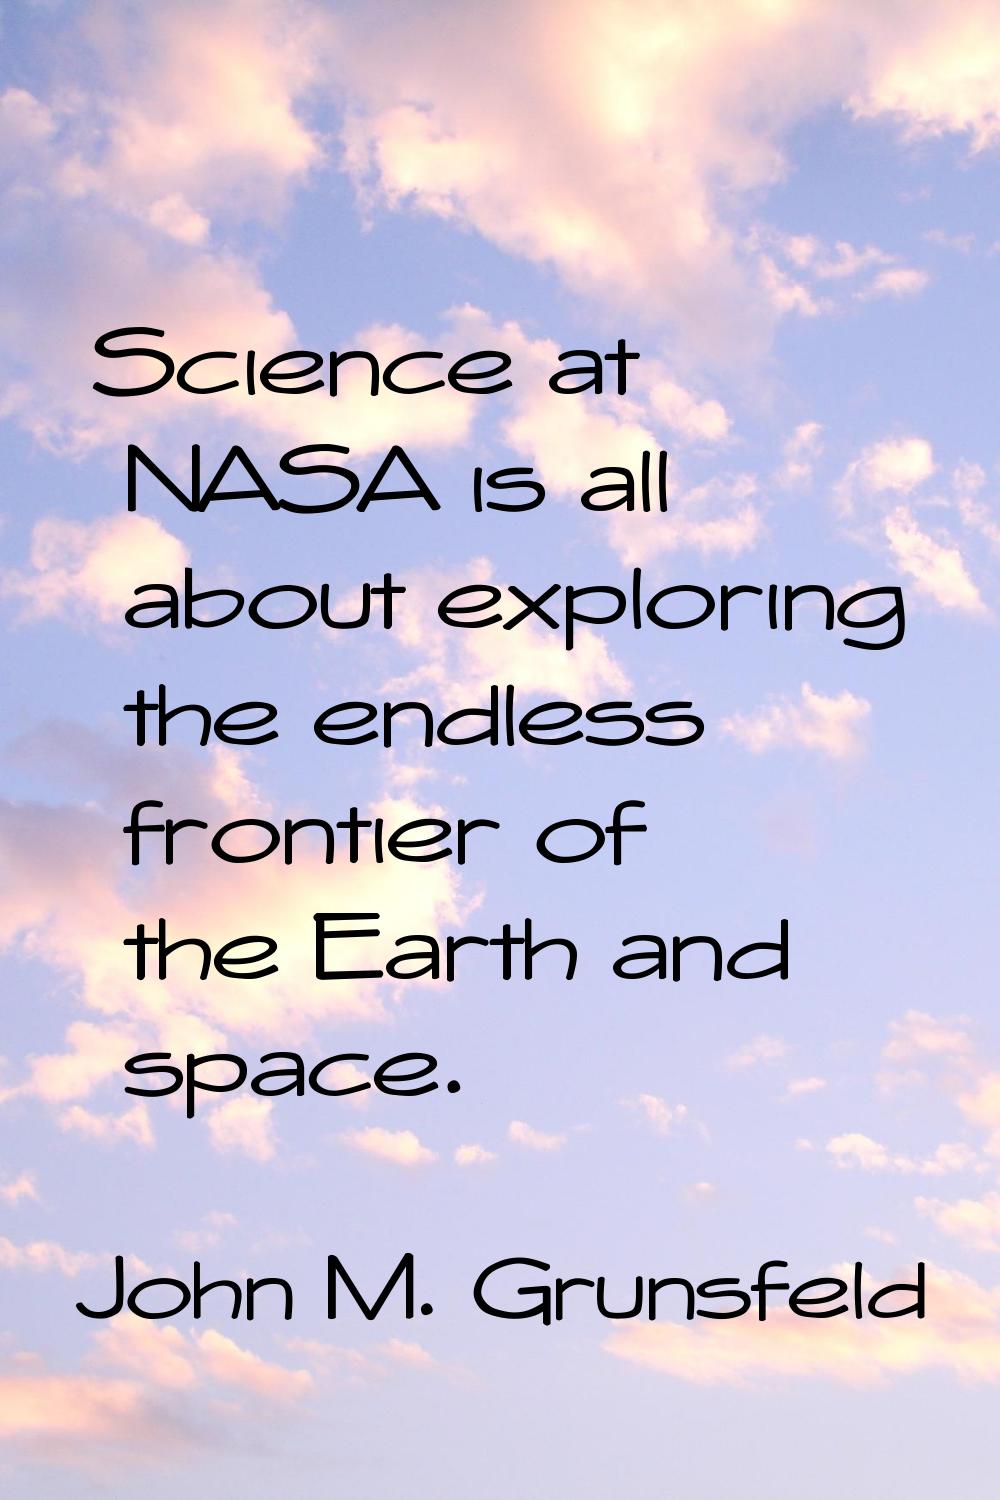 Science at NASA is all about exploring the endless frontier of the Earth and space.